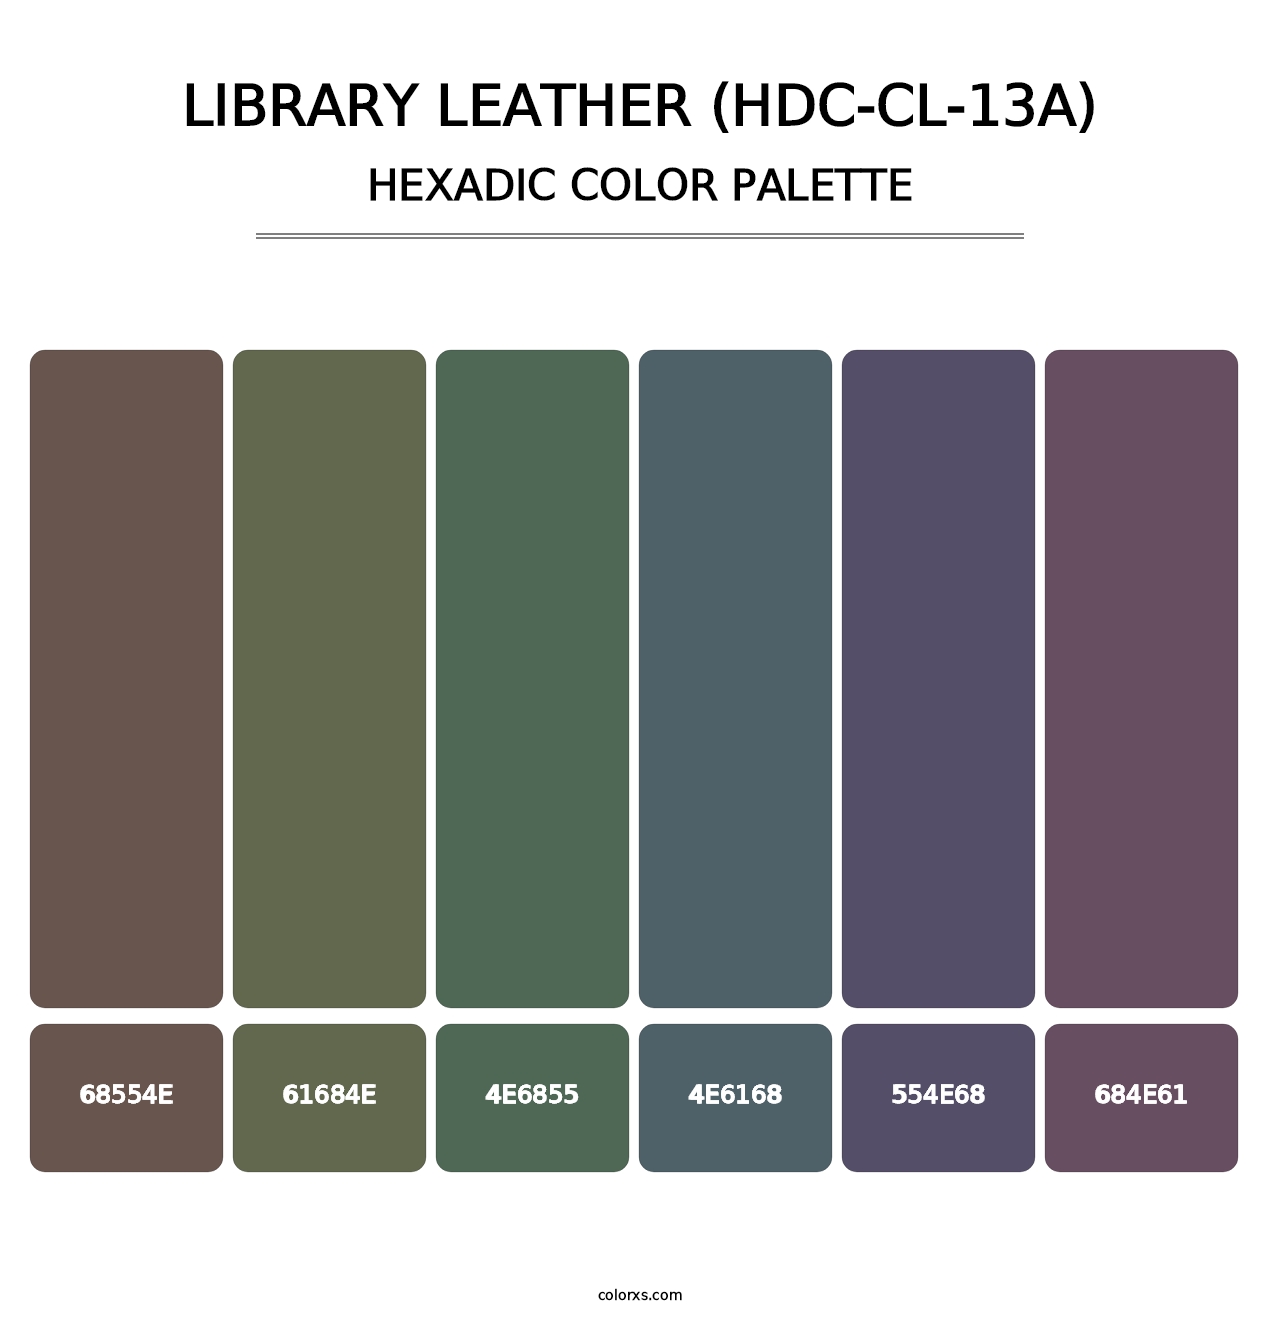 Library Leather (HDC-CL-13A) - Hexadic Color Palette